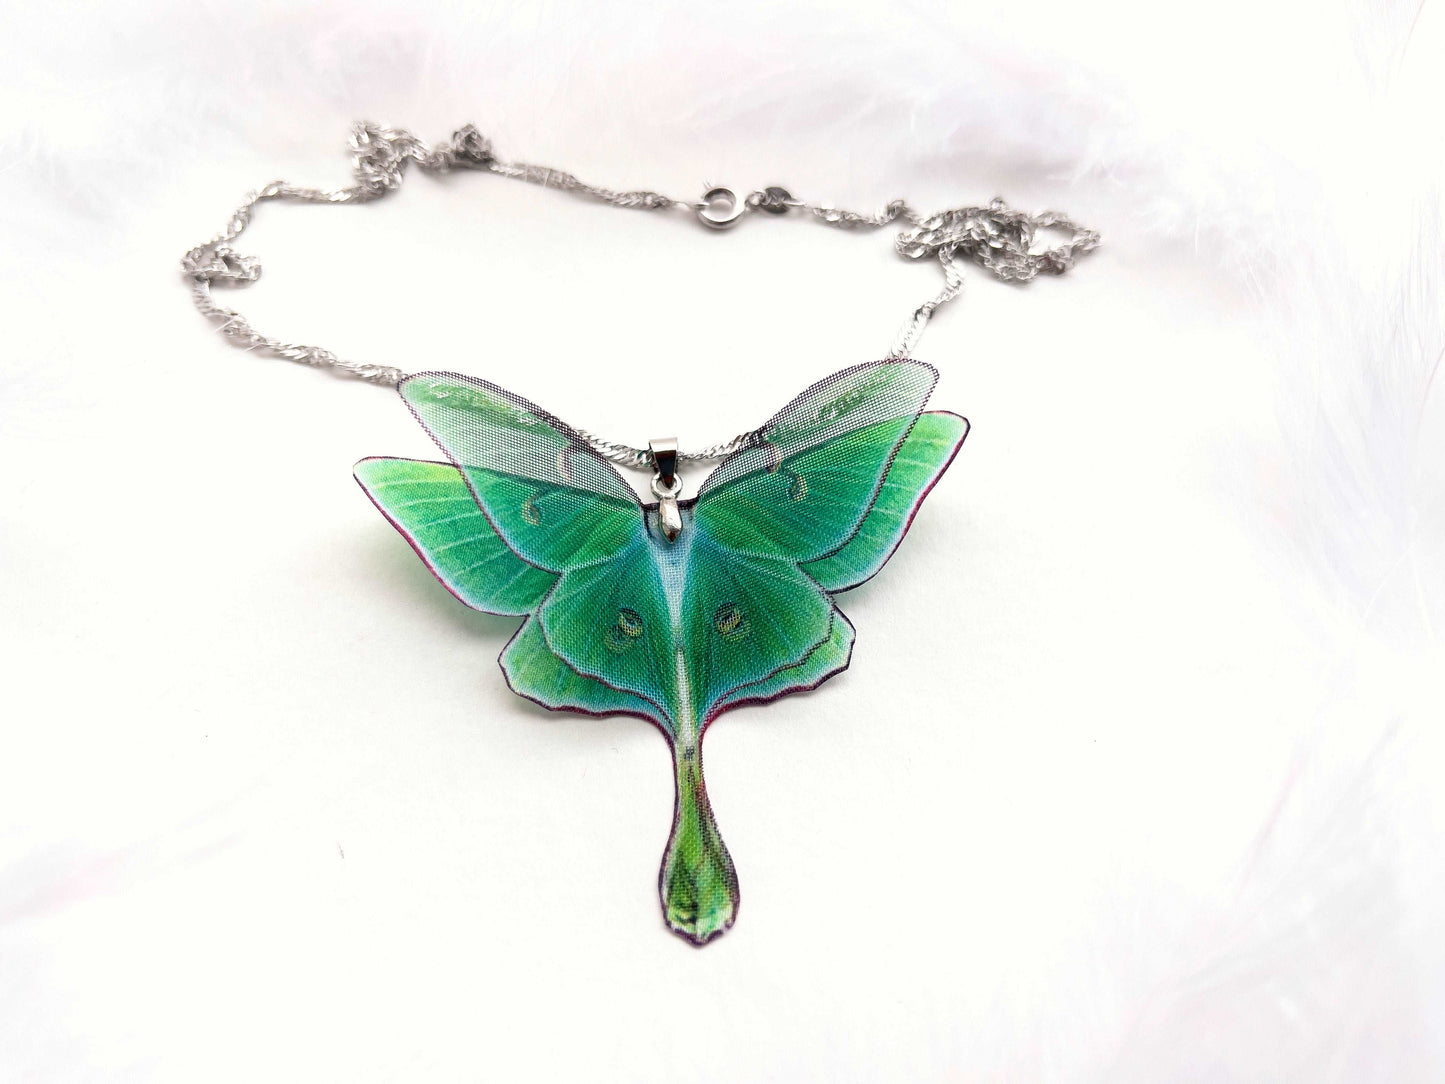 Green Lunar Moth Pendant with matching chain - The perfect gift for the nature lover in your life